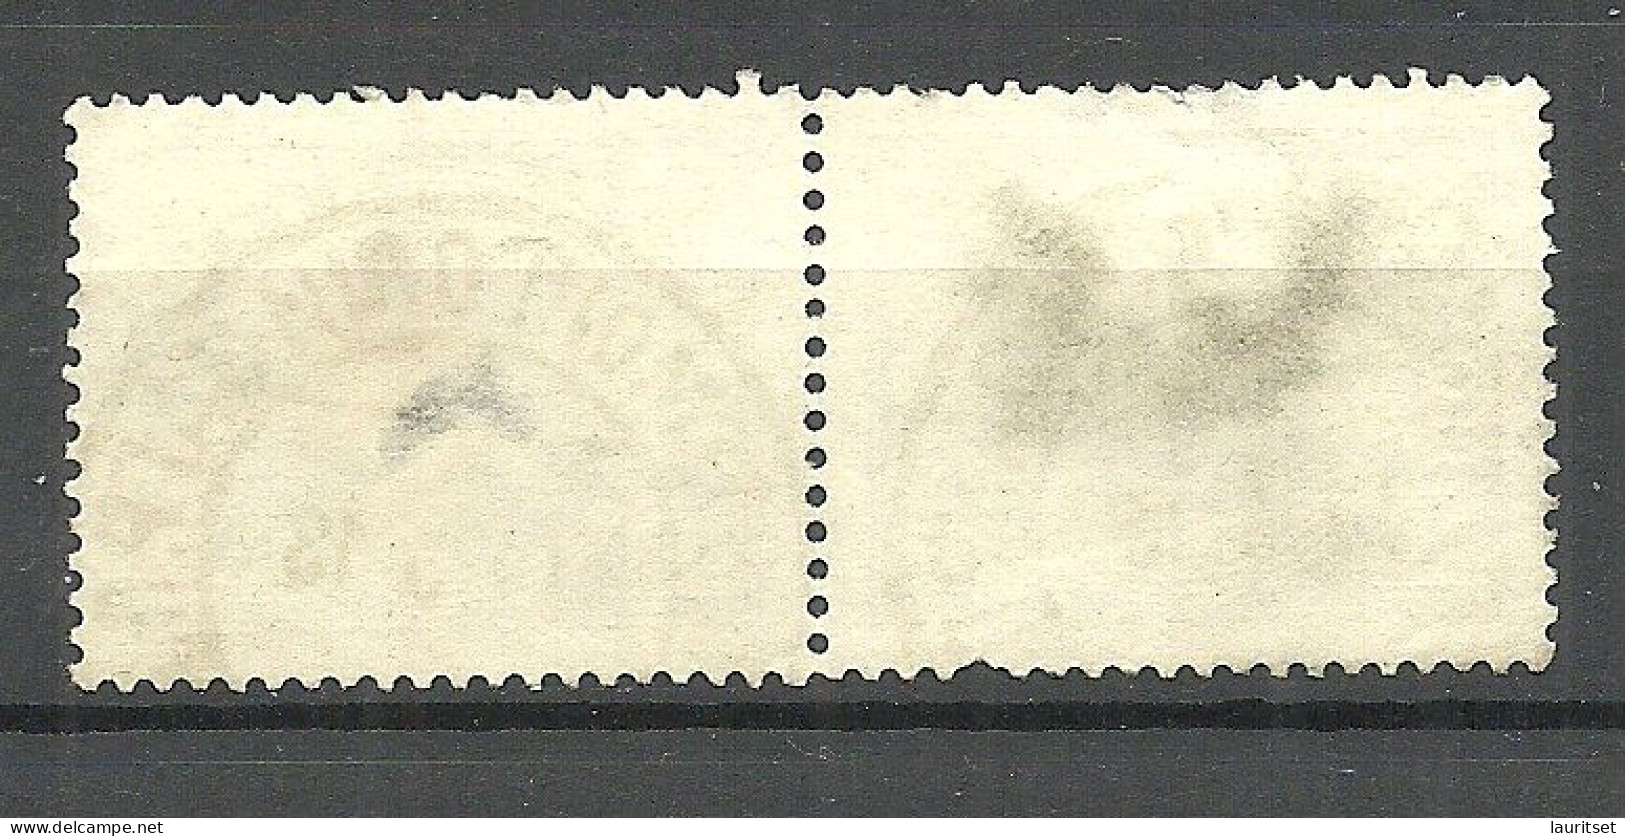 RUSSLAND RUSSIA 1913 Michel 86 As Pair O MONGOLIA Mongolei NB! Faults! Defects! - Used Stamps